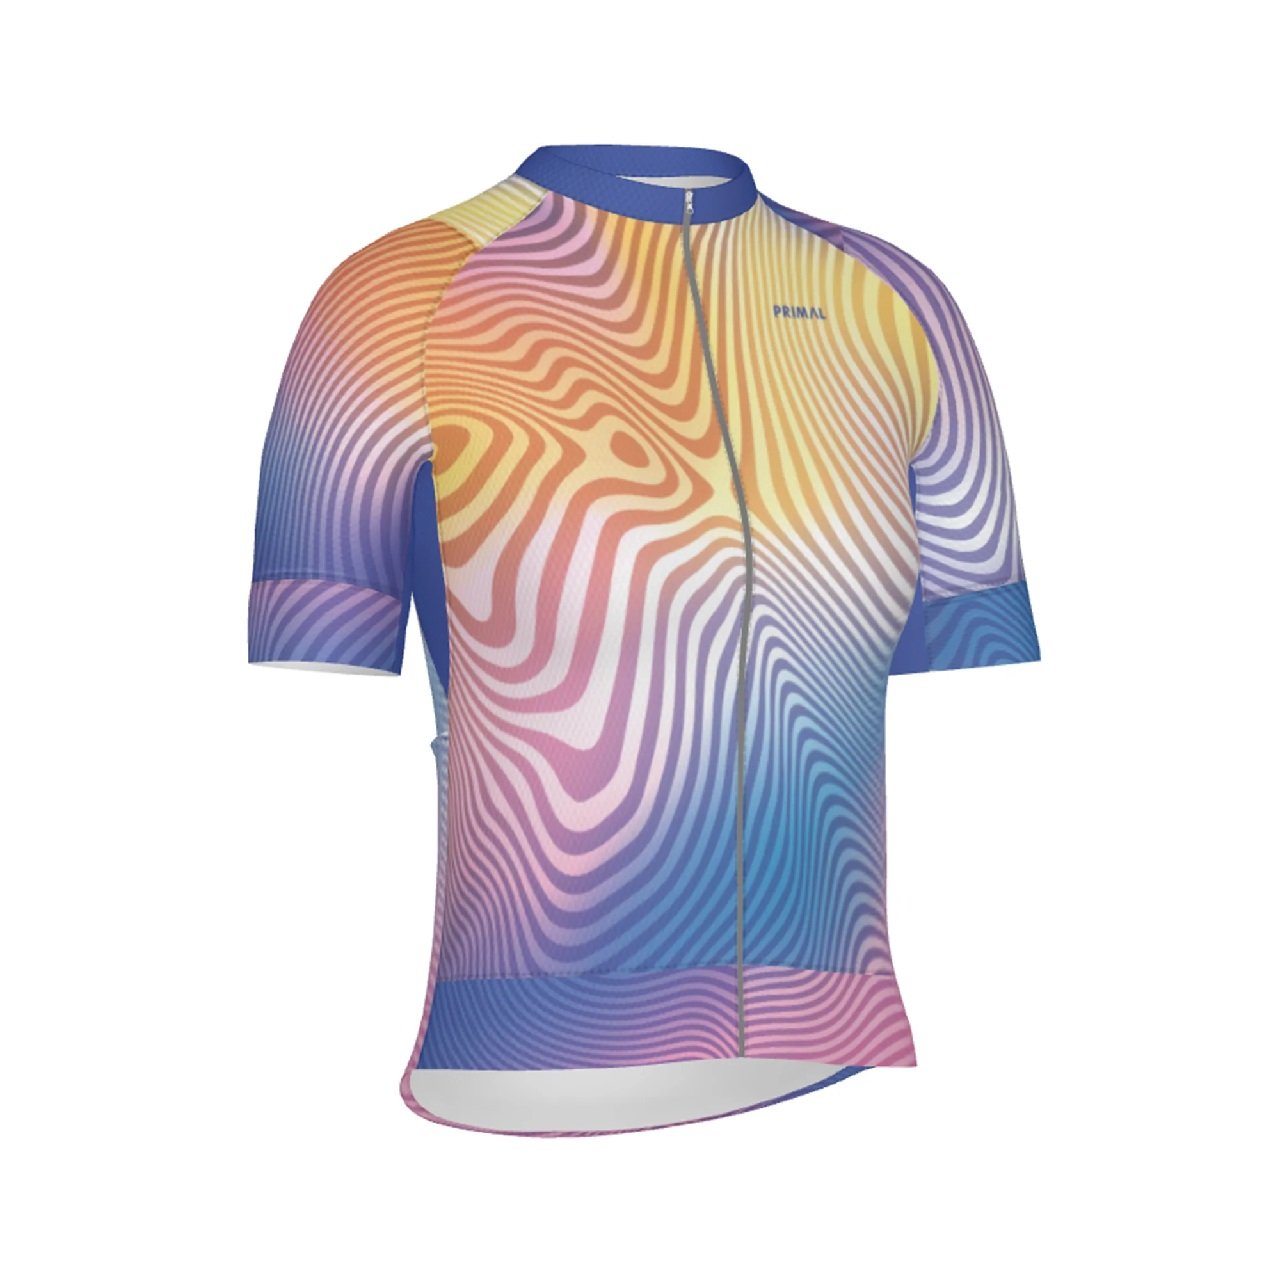 Sonic Barrier Women's Equinox Cycling Jersey by Primal